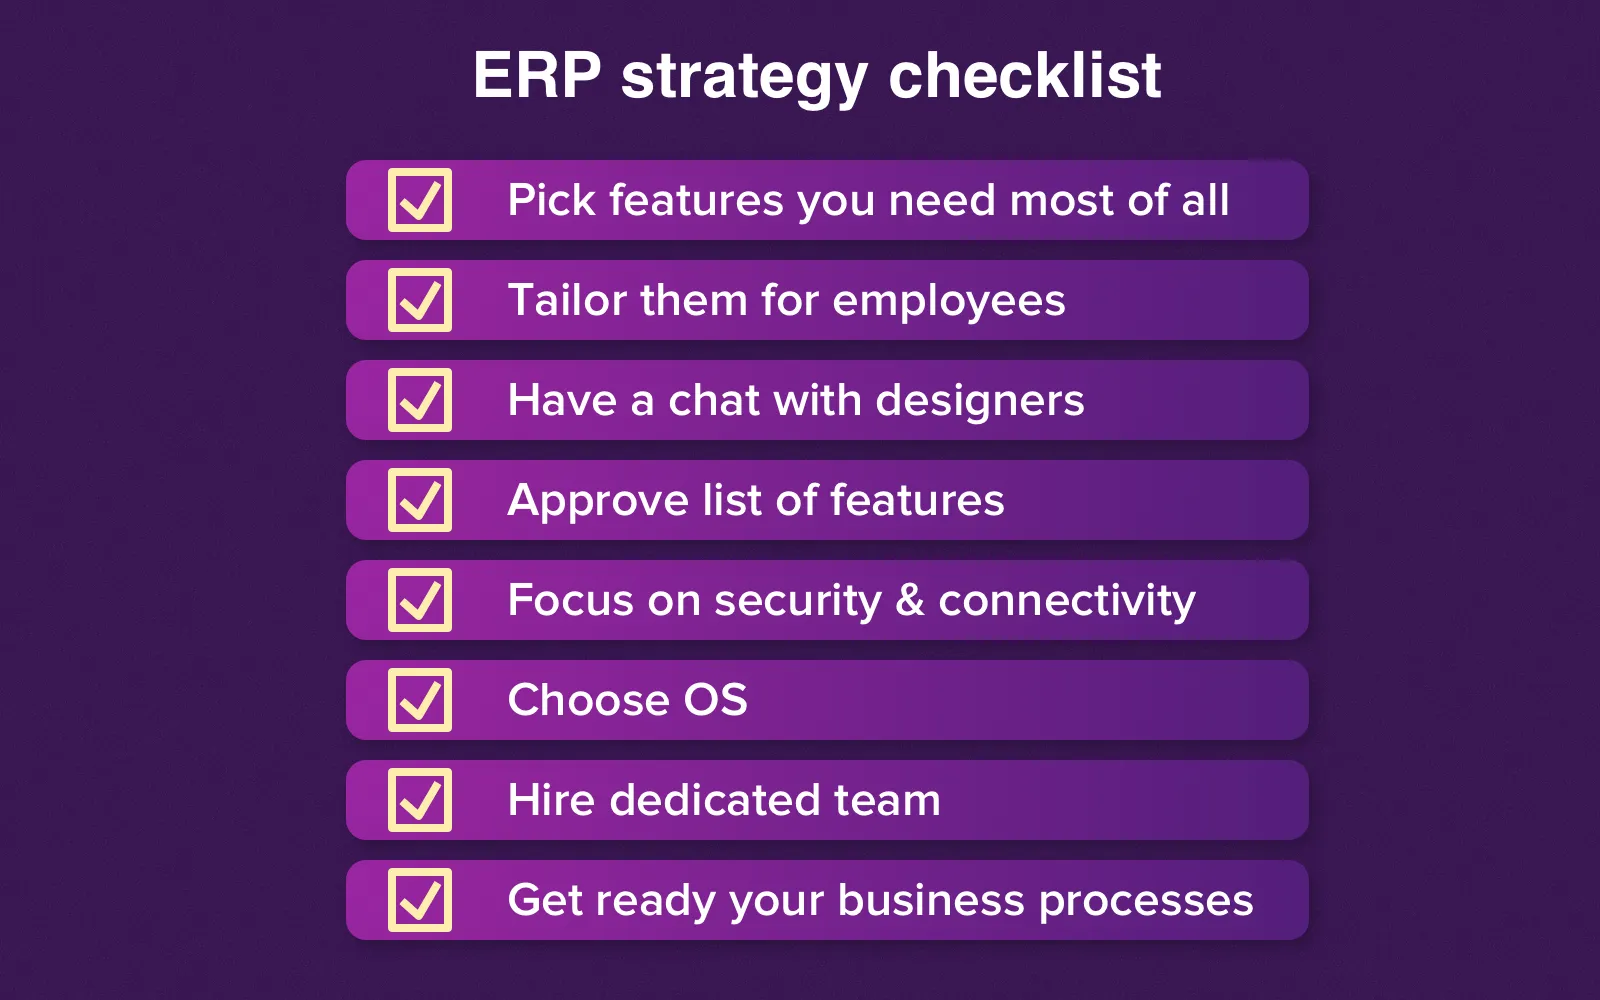 Ensure you've completed this checklist before the start of ERP mobile application development